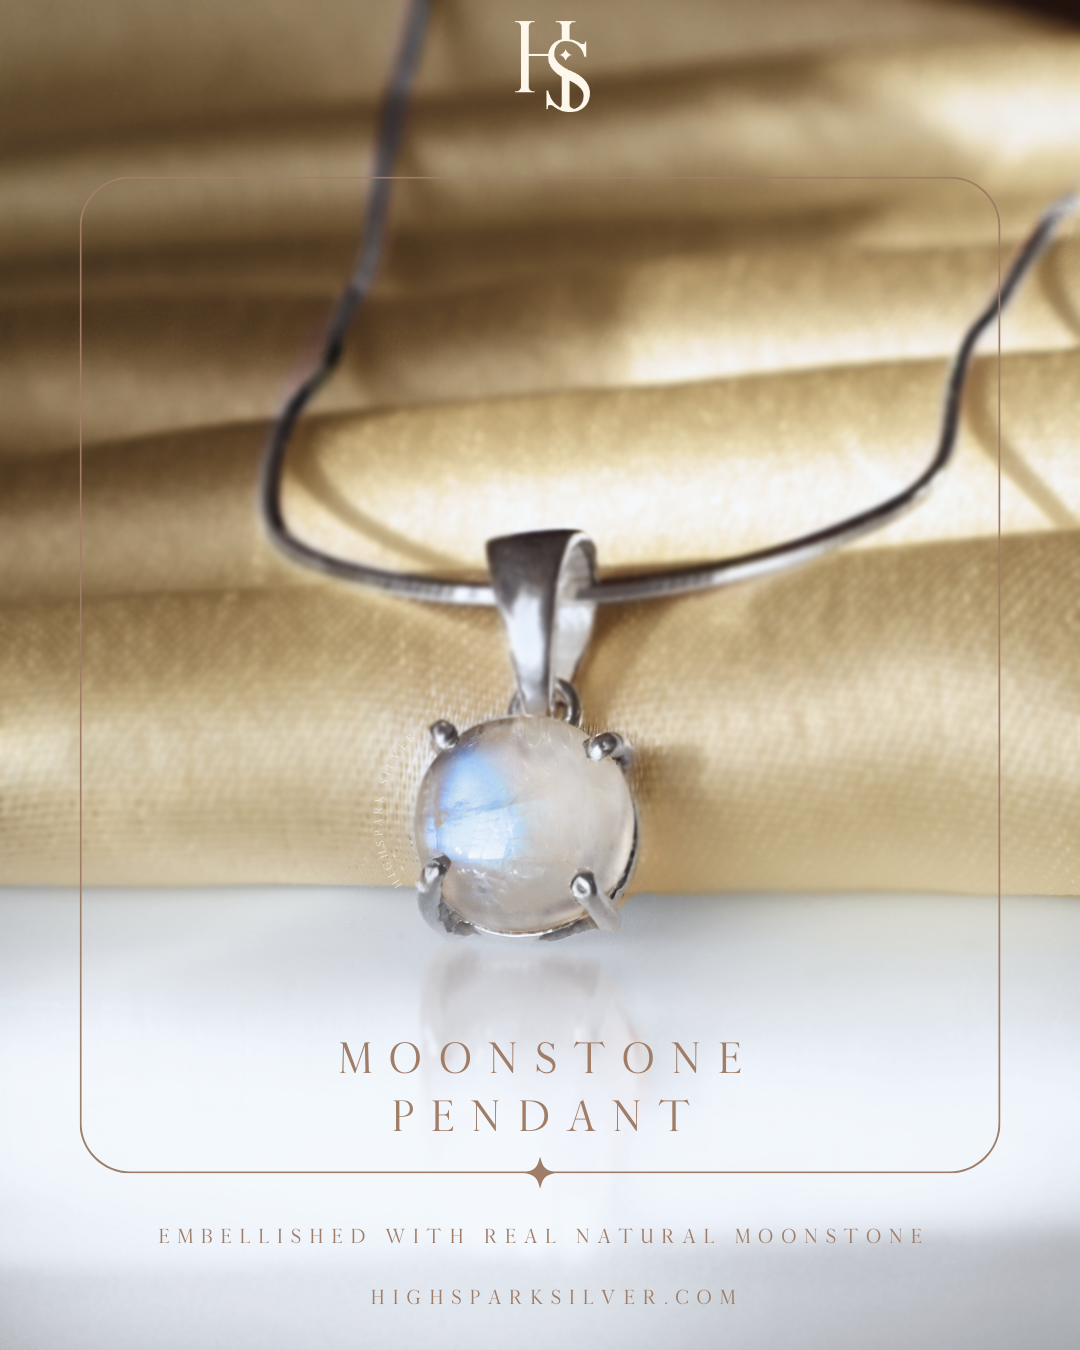 Moonstone Pendant in 92.5 Sterling Silver with Real Moonstone